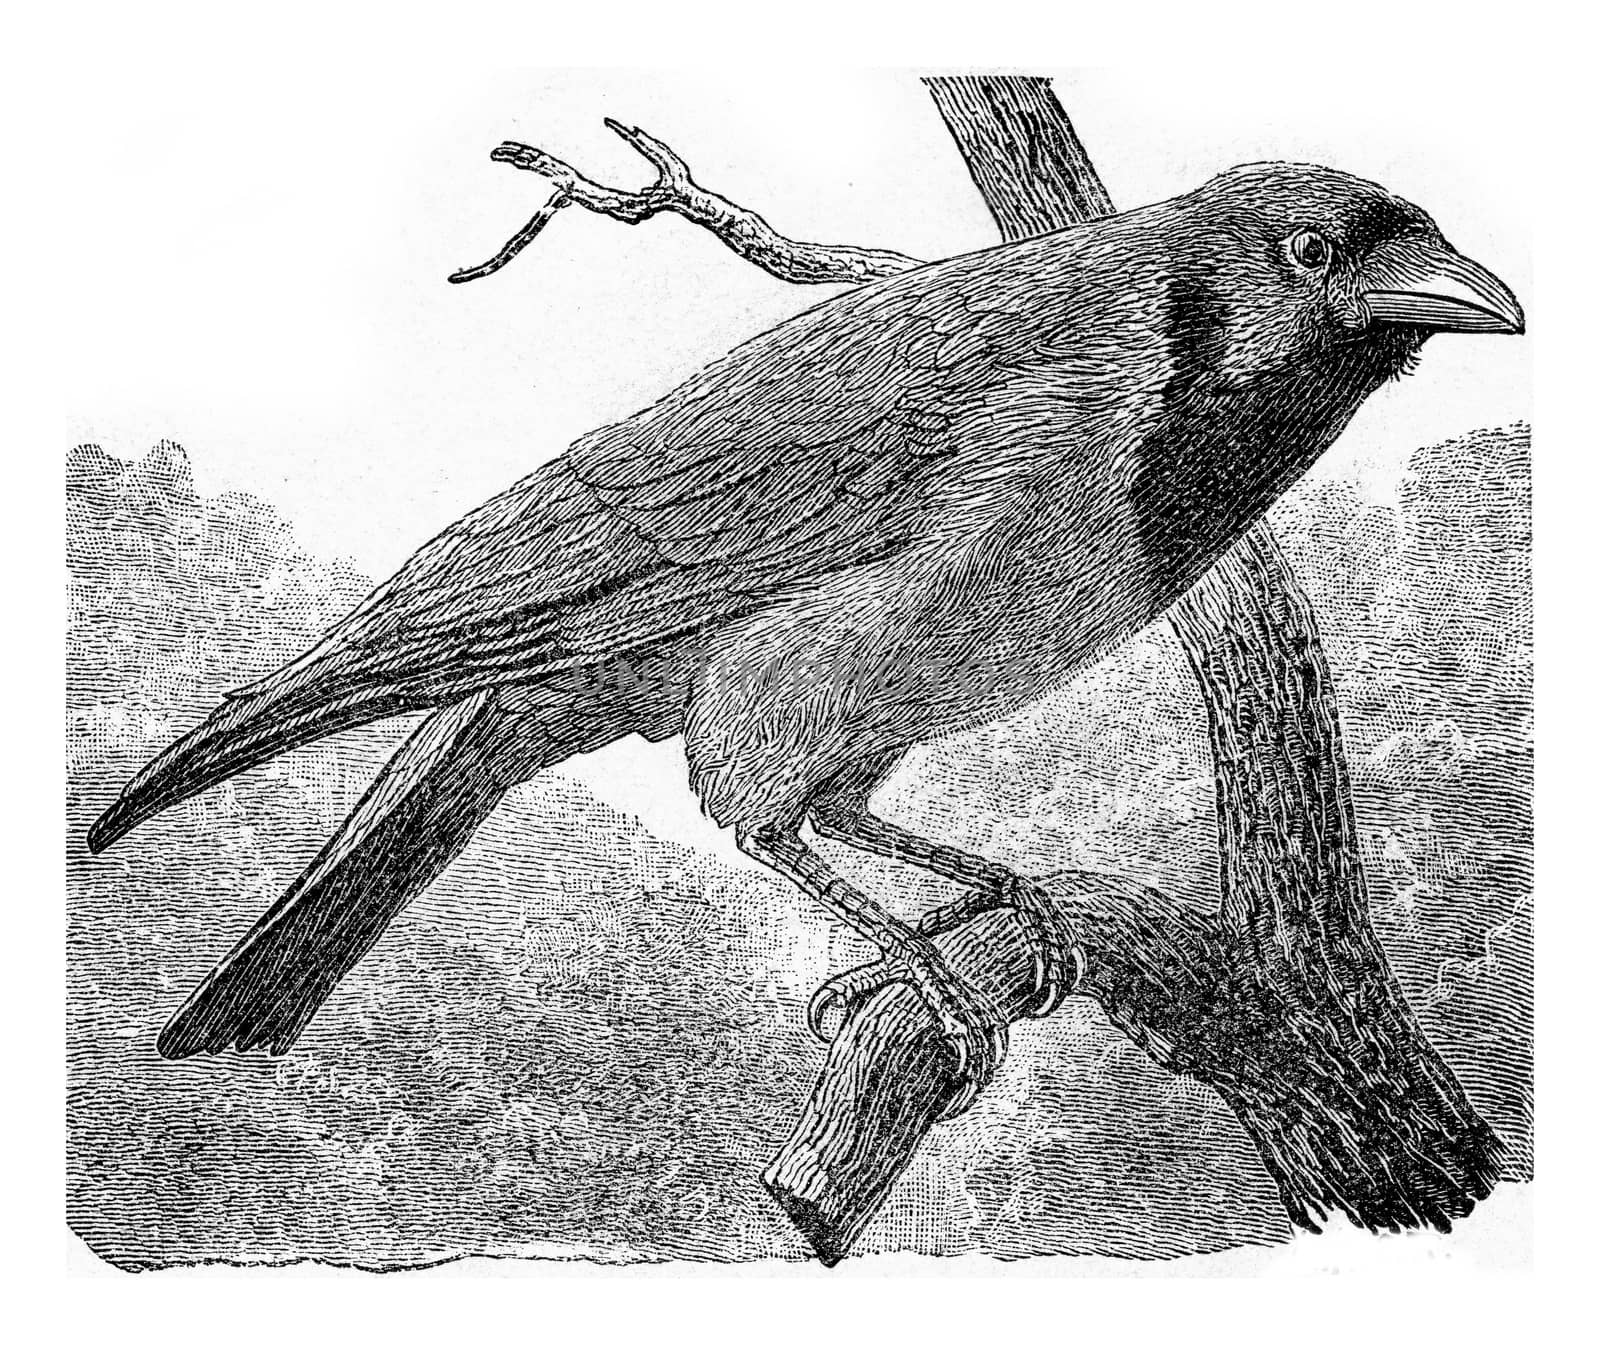 The common crow, vintage engraved illustration. From Deutch Vogel Teaching in Zoology.
